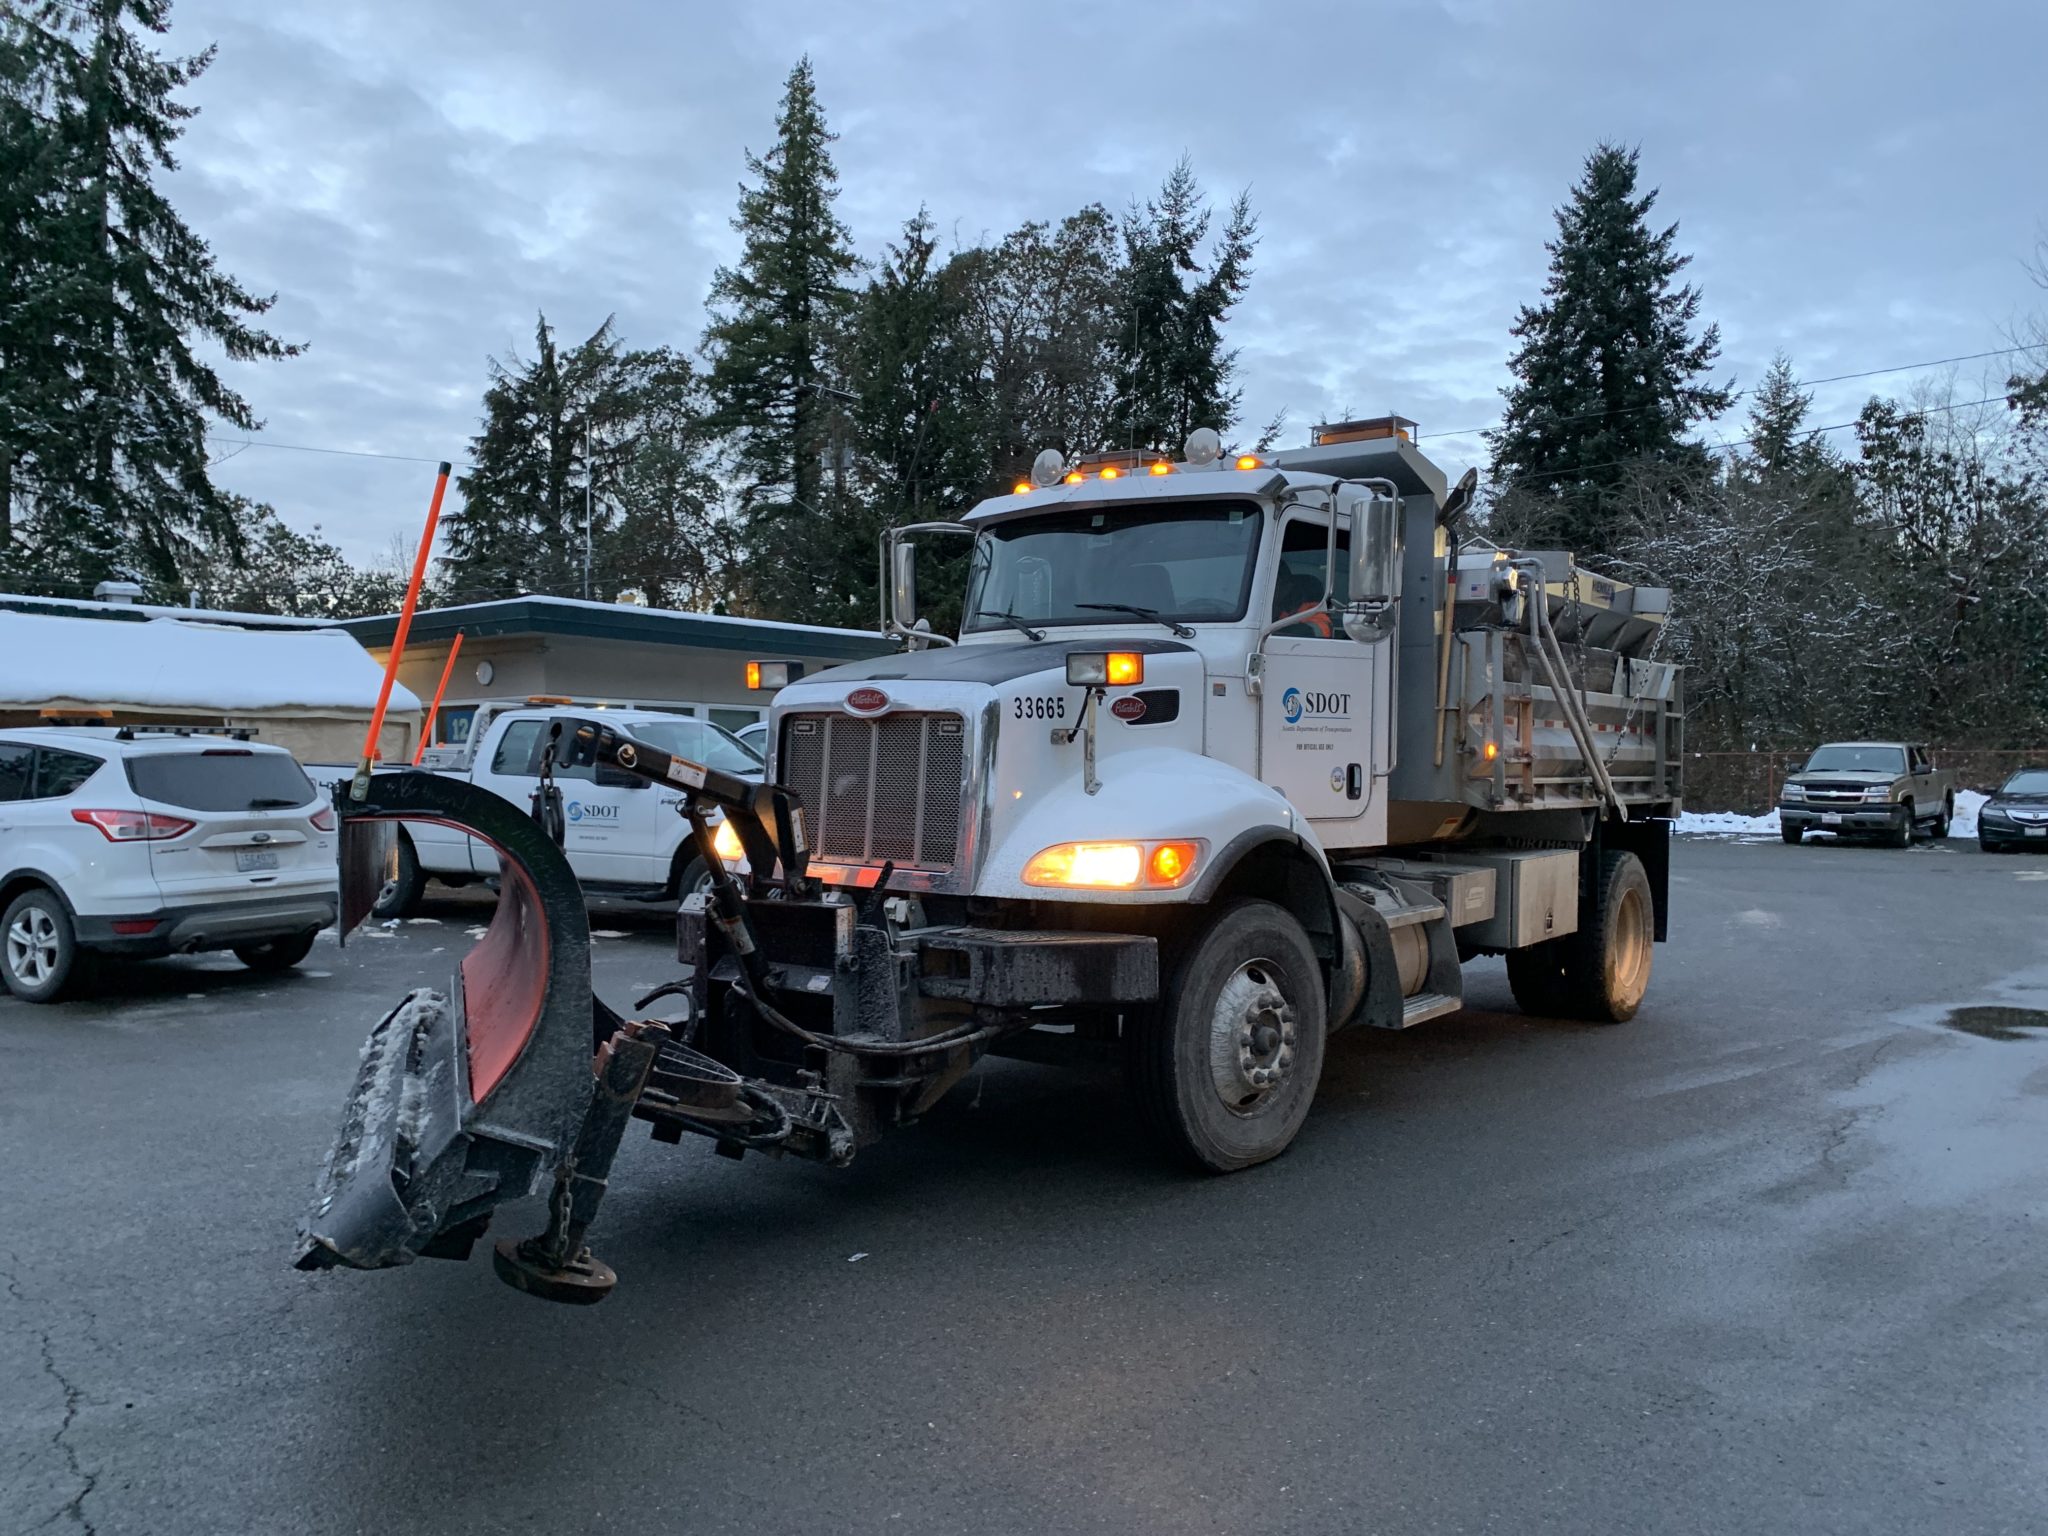 A large snow plow is parked on pavement, ready to return to work clearing streets in Seattle. Several other smaller vehicles and large trees are visible in the background.